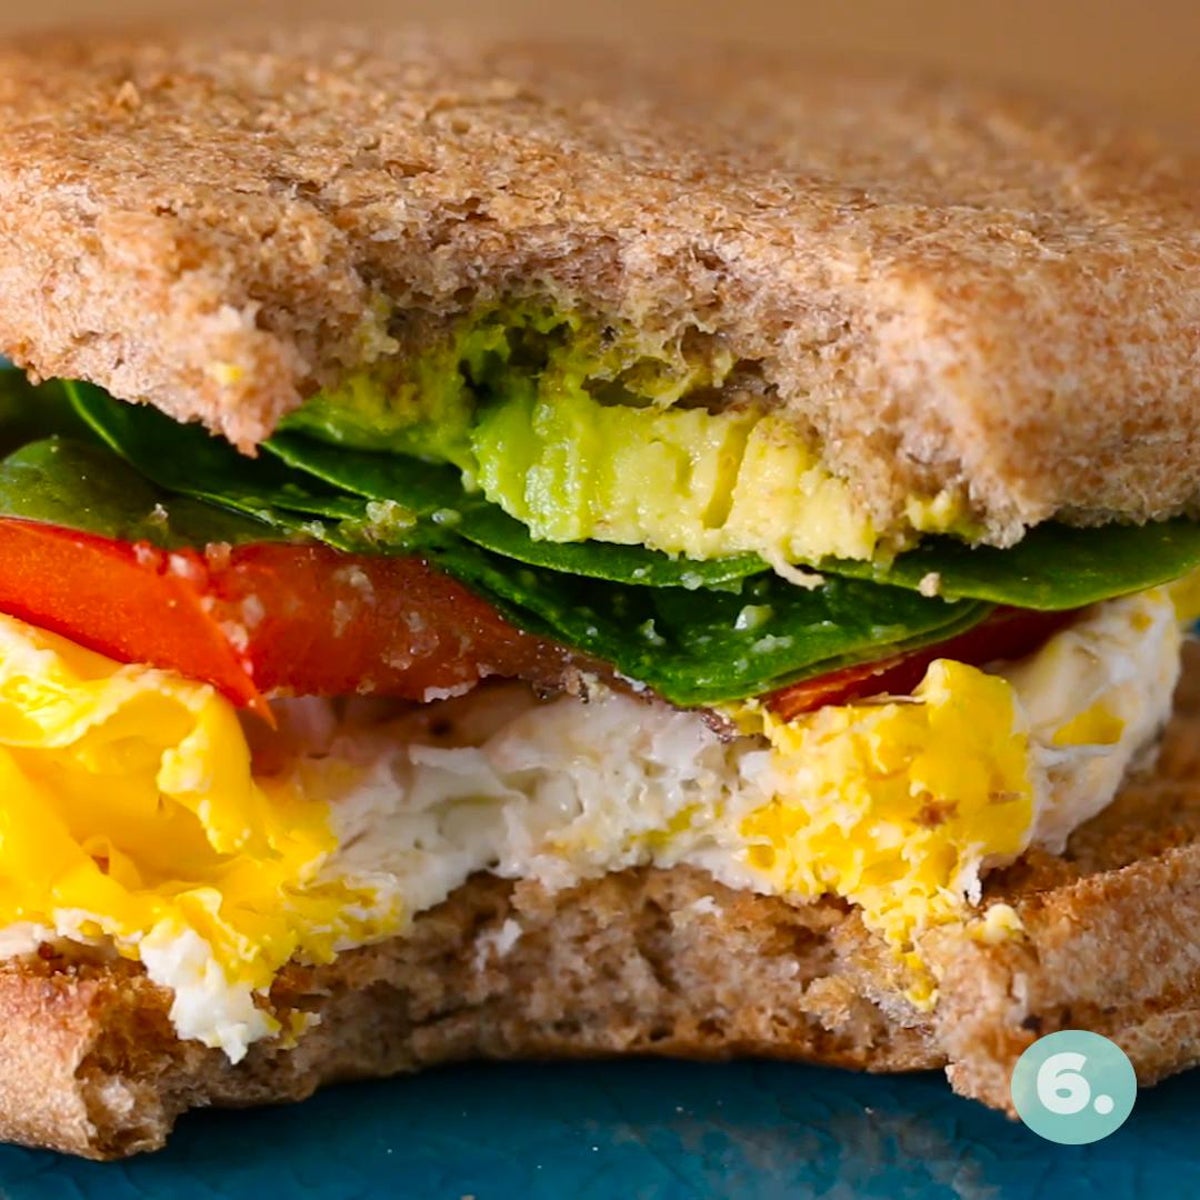 Microwave Egg Breakfast Sandwich with Cheddar and Avocado Recipe